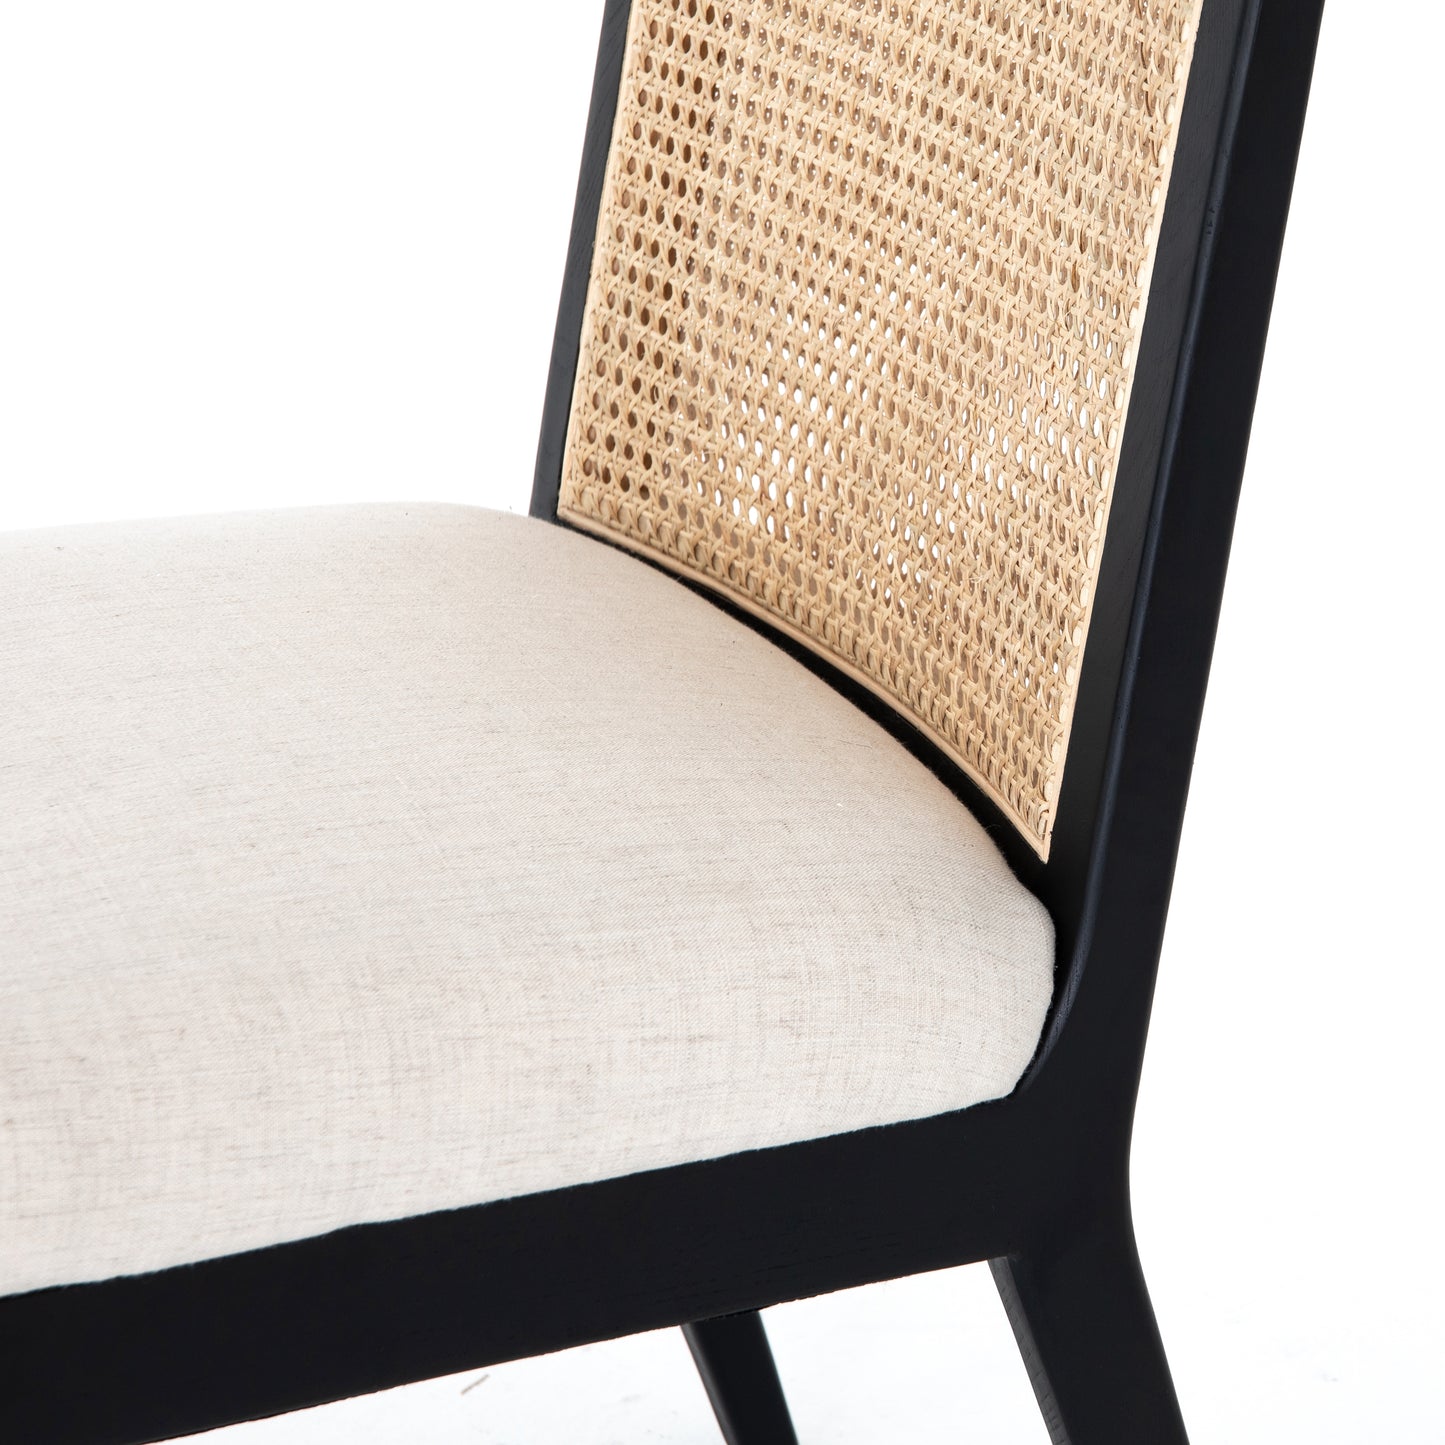 Load image into Gallery viewer, Antonia Cane Armless Dining Chair Dining Chair Four Hands     Four Hands, Burke Decor, Mid Century Modern Furniture, Old Bones Furniture Company, Old Bones Co, Modern Mid Century, Designer Furniture, https://www.oldbonesco.com/
